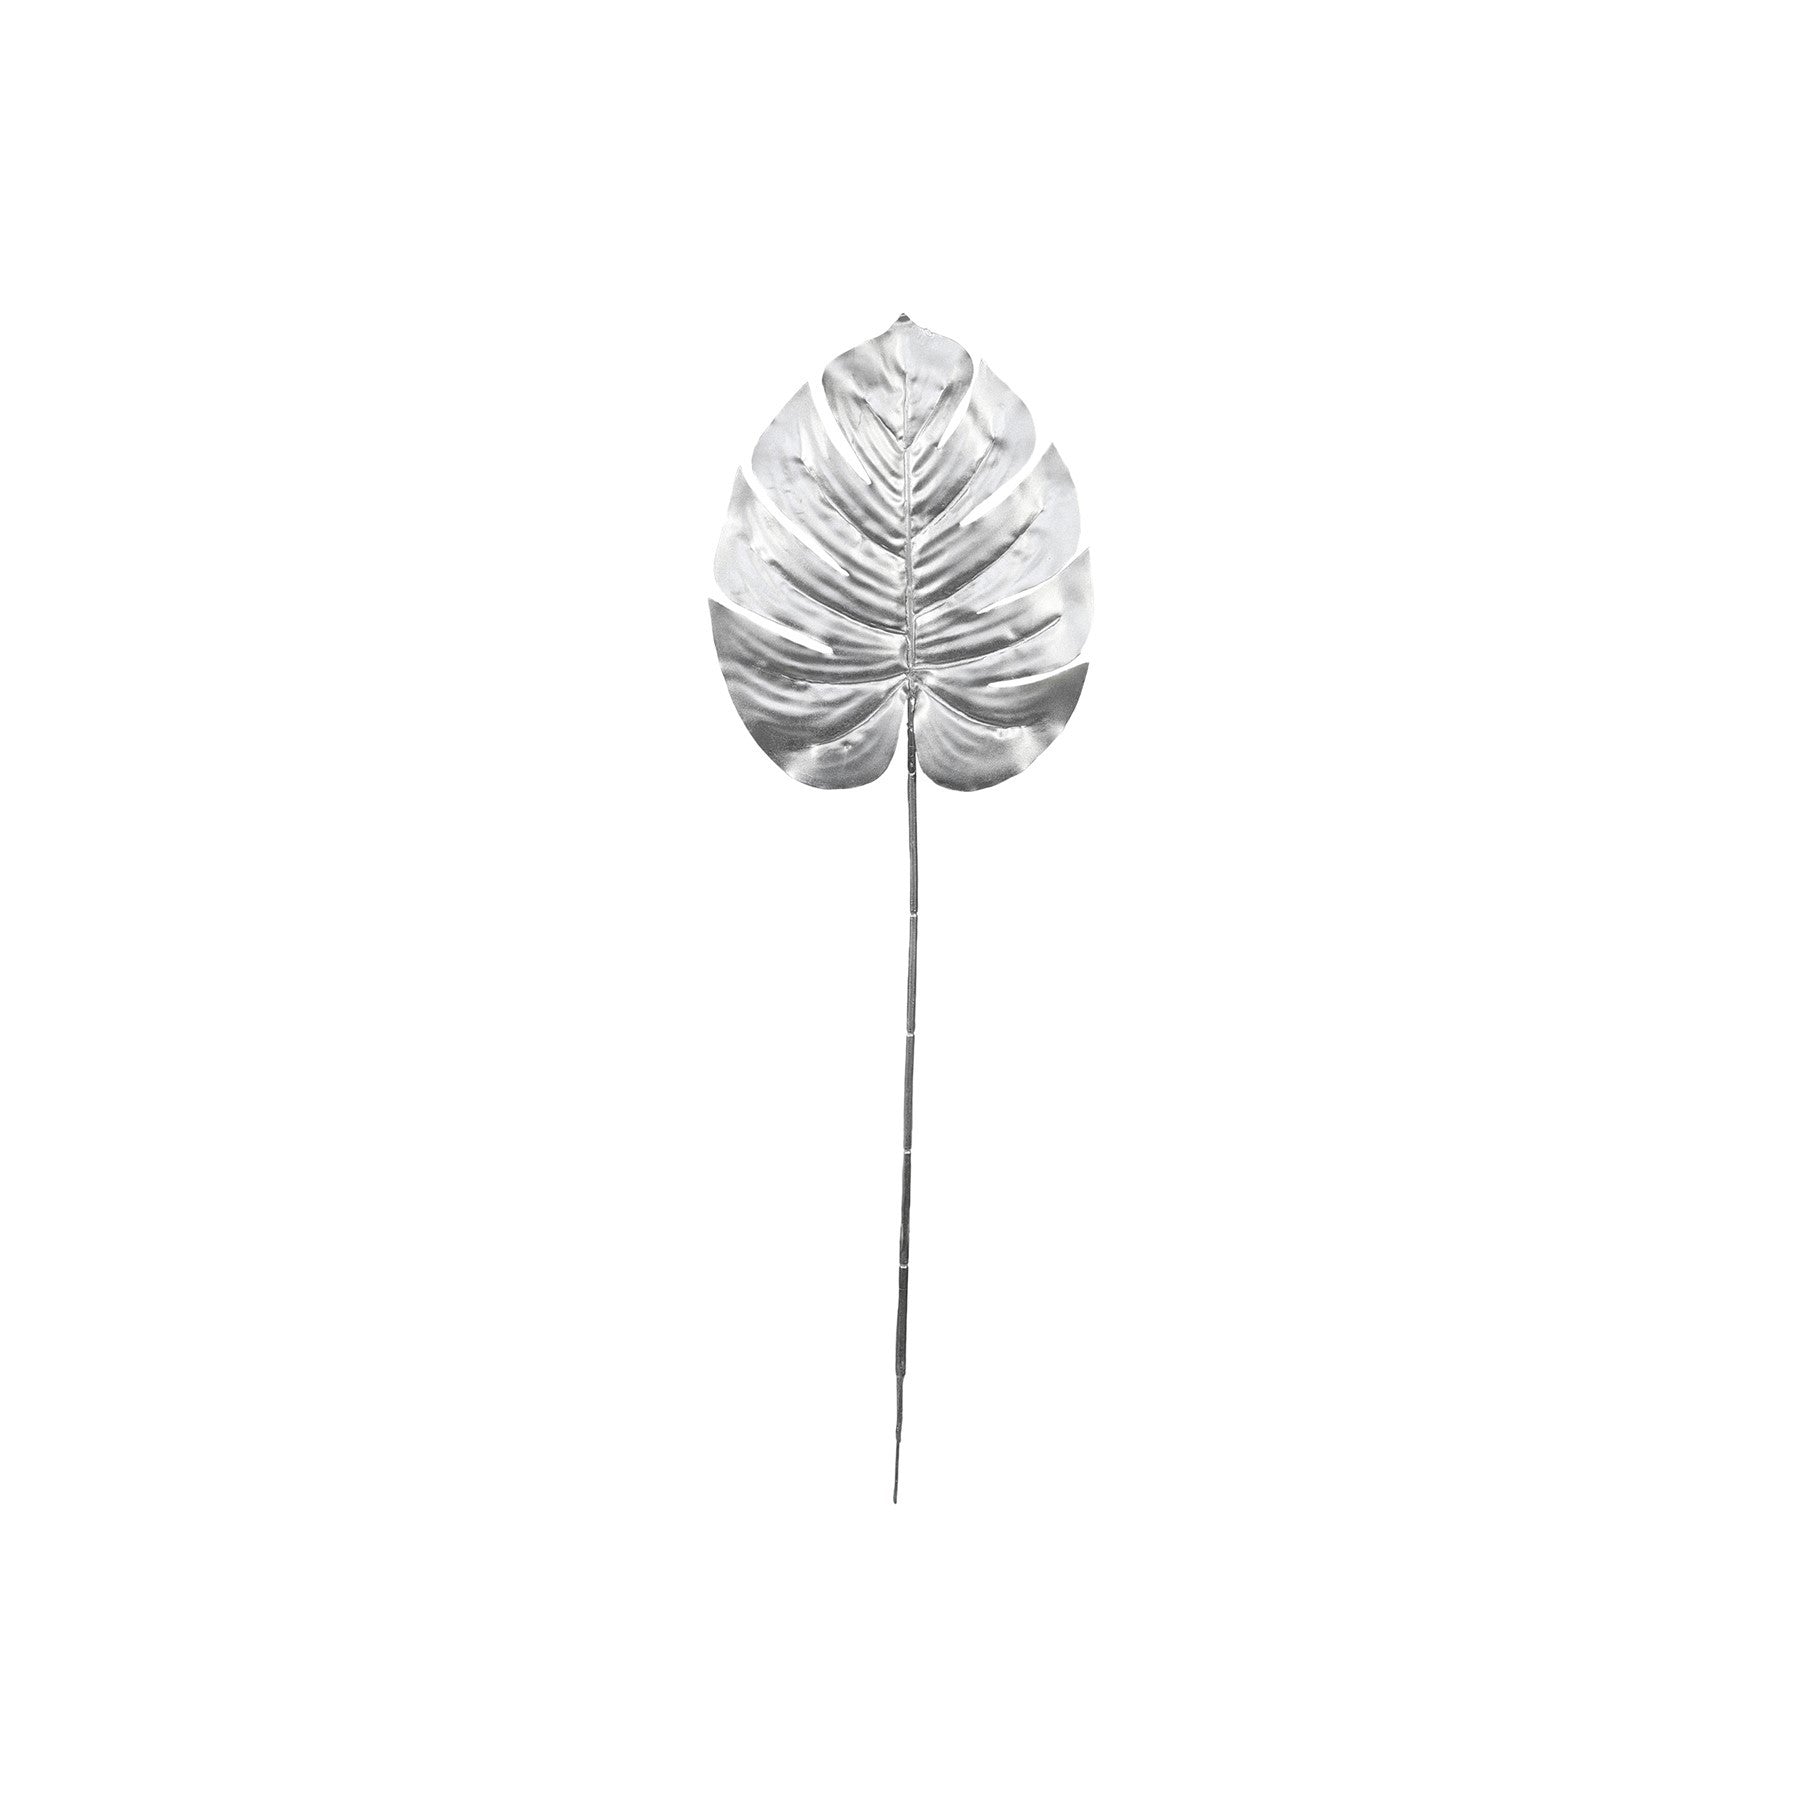 View Silver Metallic Monstera leaf Small information